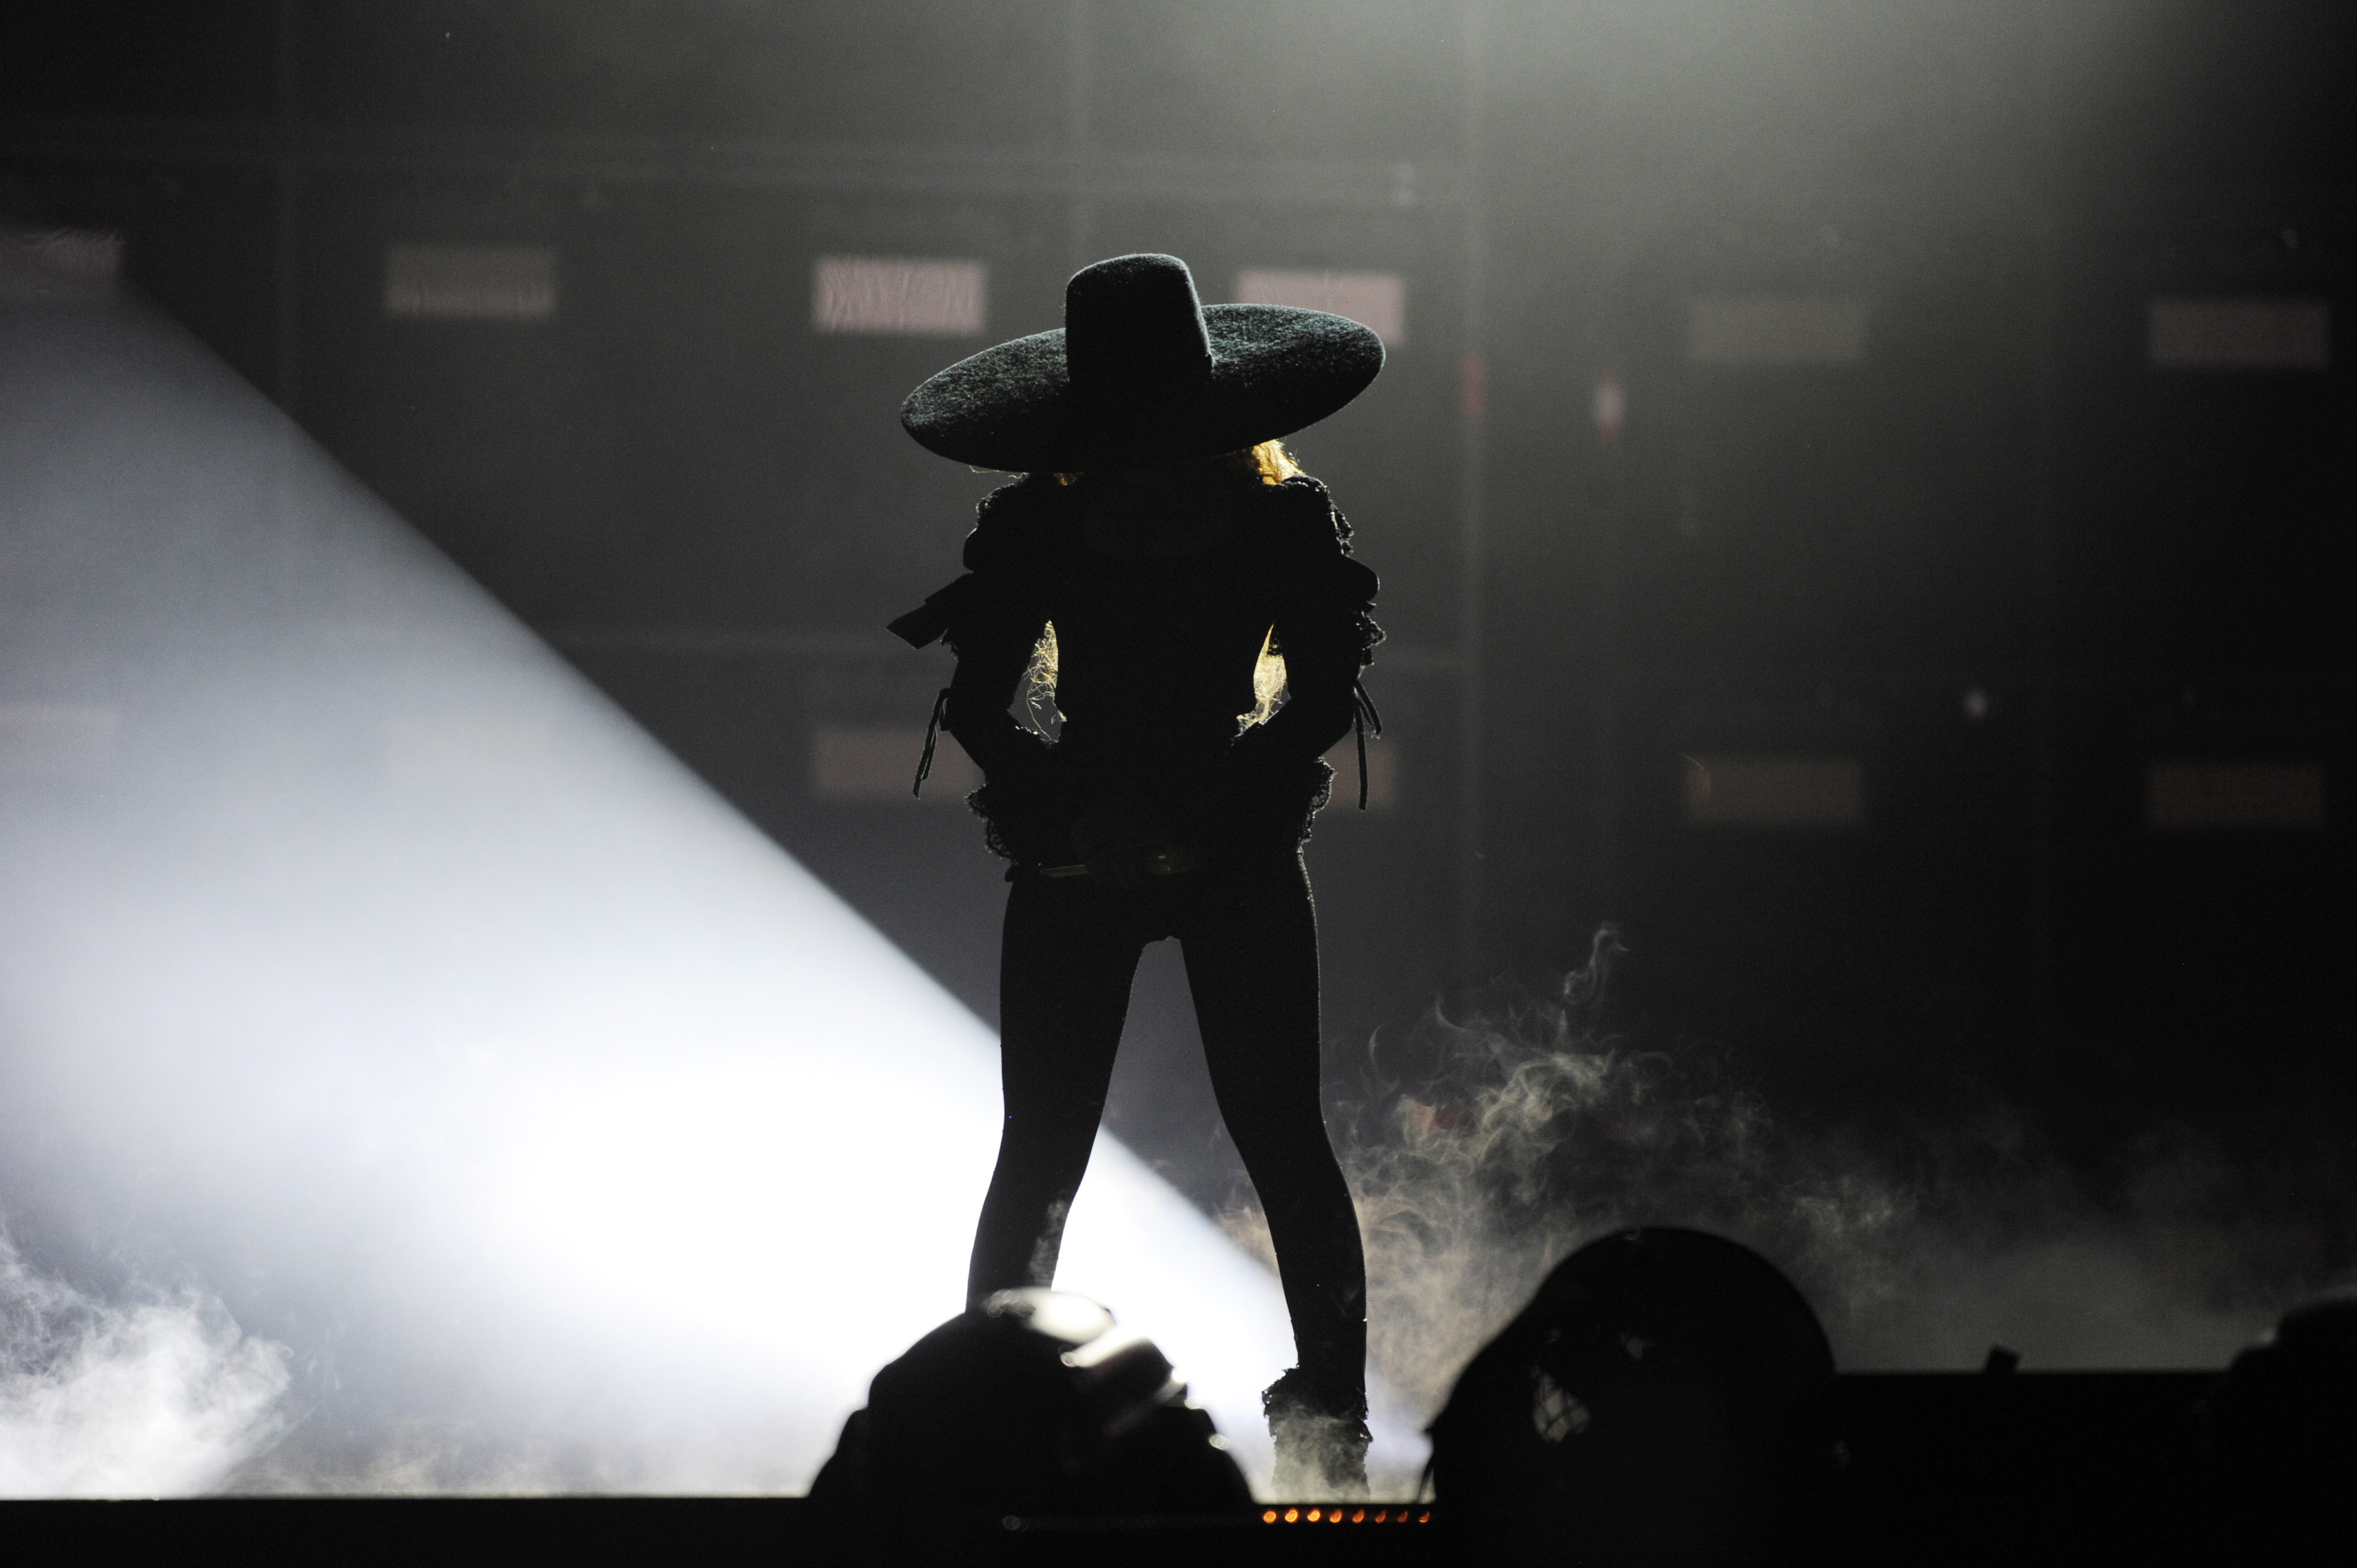 See All of Beyonce's 'Formation' Tour Looks
